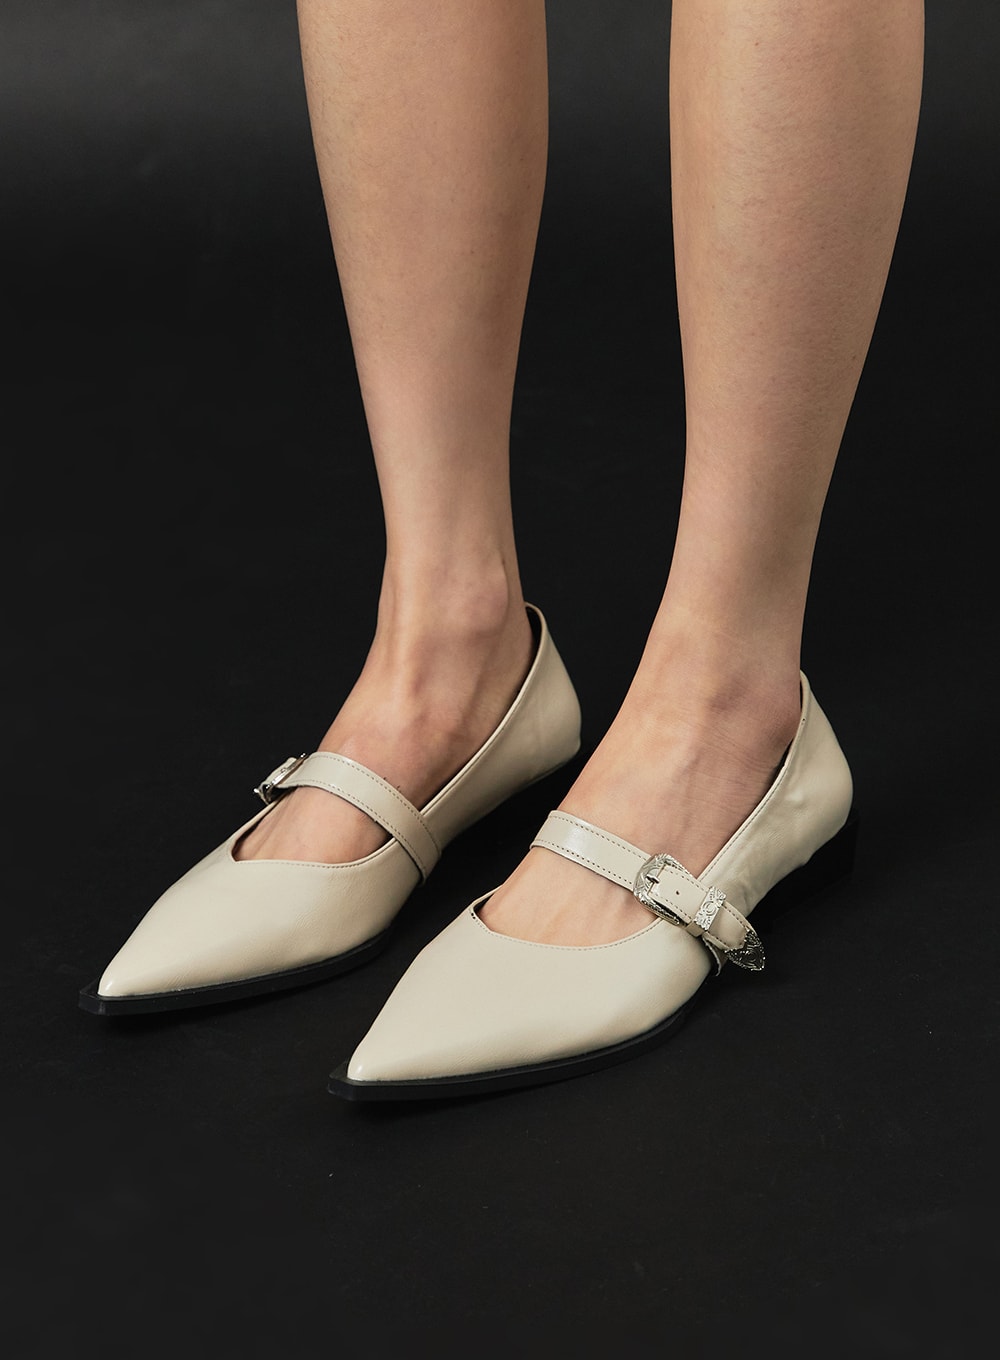 buckle-pointed-toe-flats-with-low-heels-ca412 / Light beige